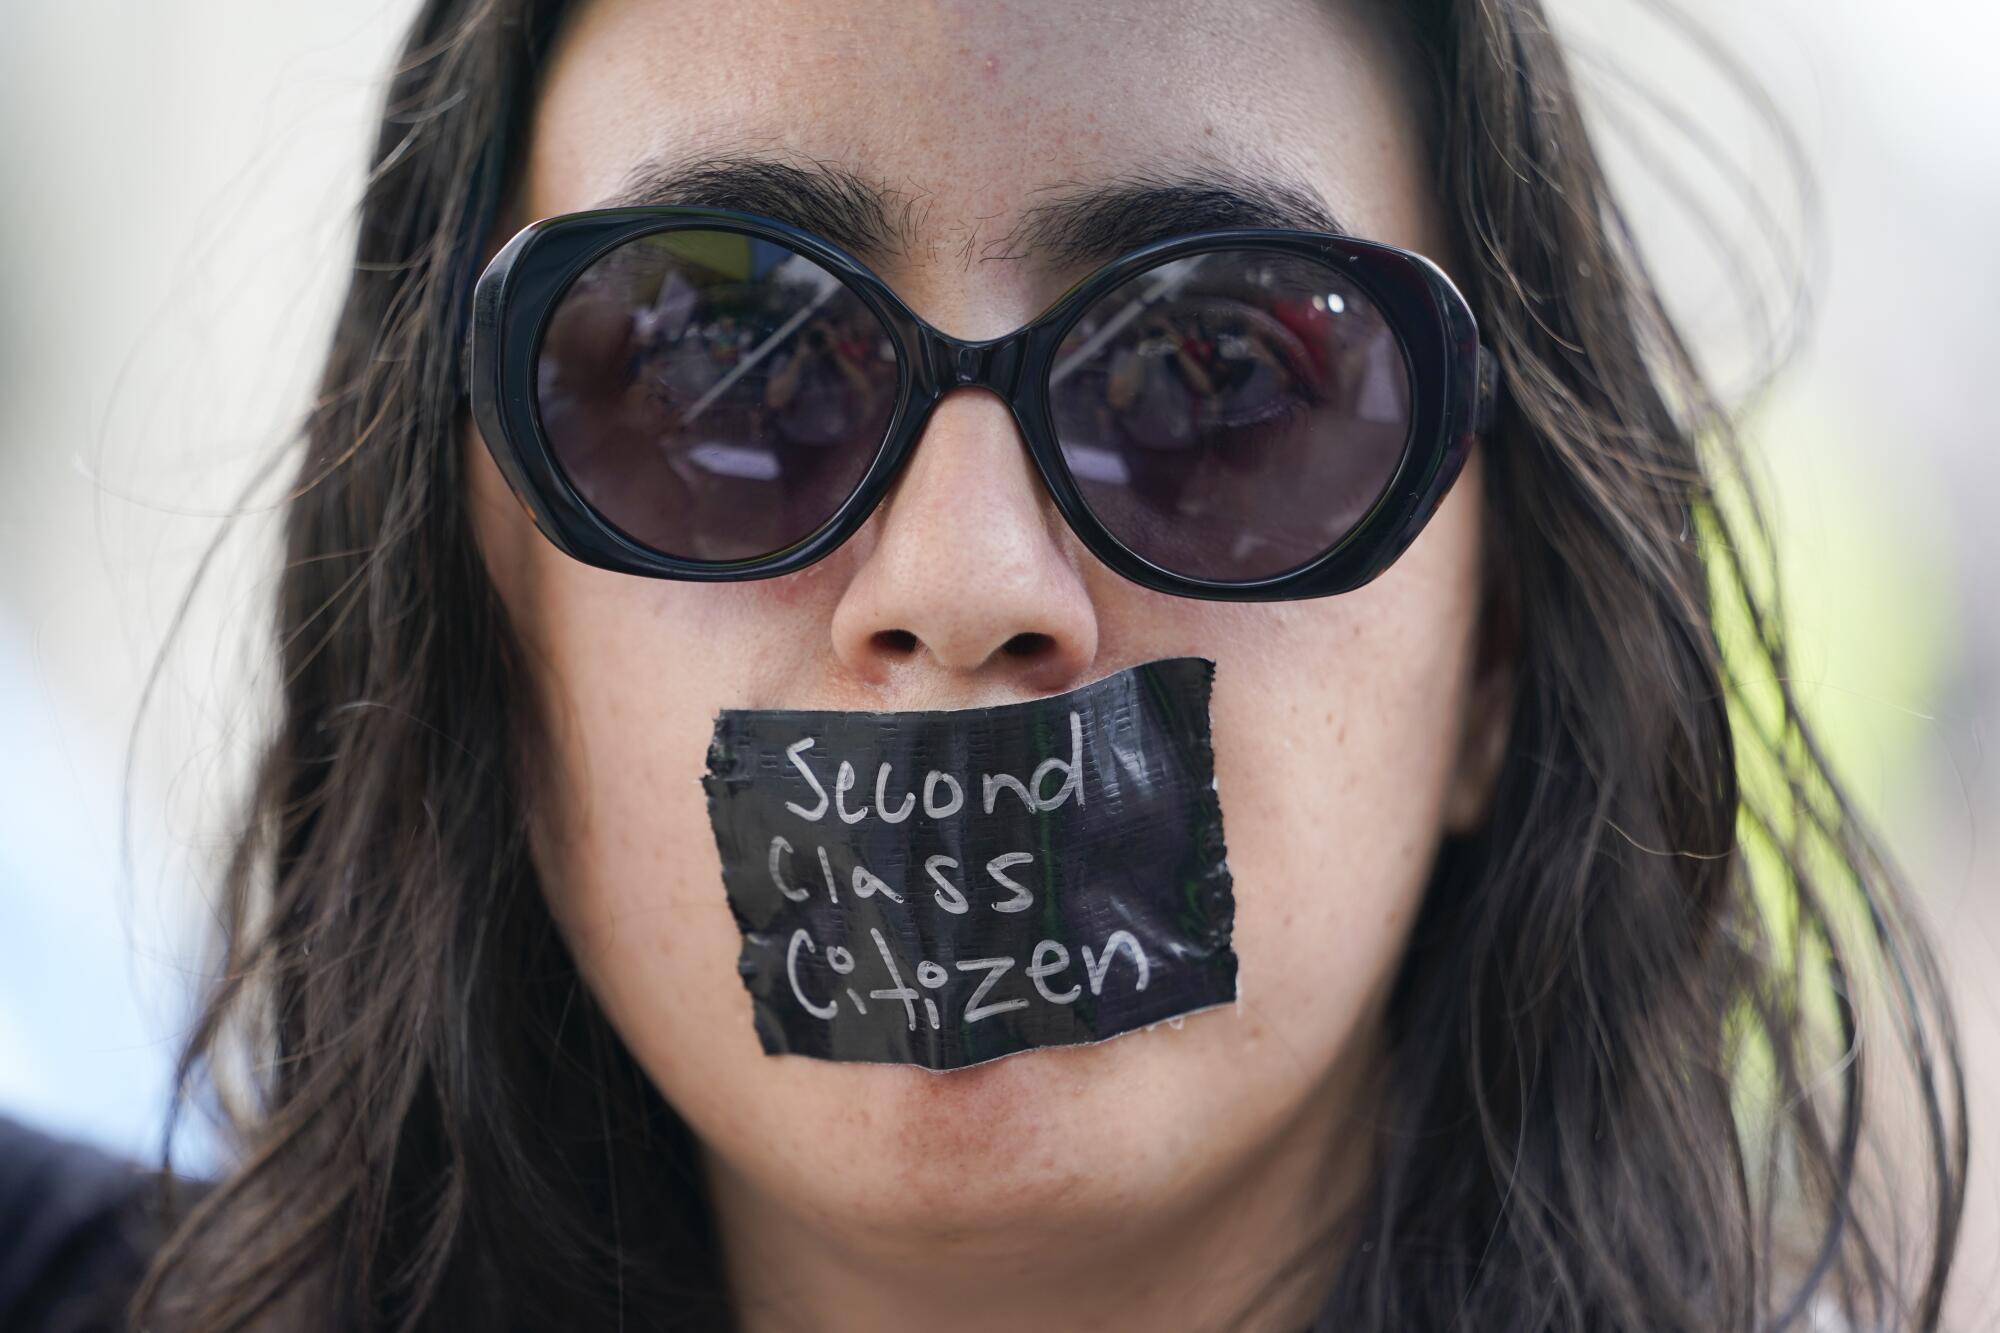 An abortion rights activist wears tape reading "second class citizen"  outside the Supreme Court in Washington